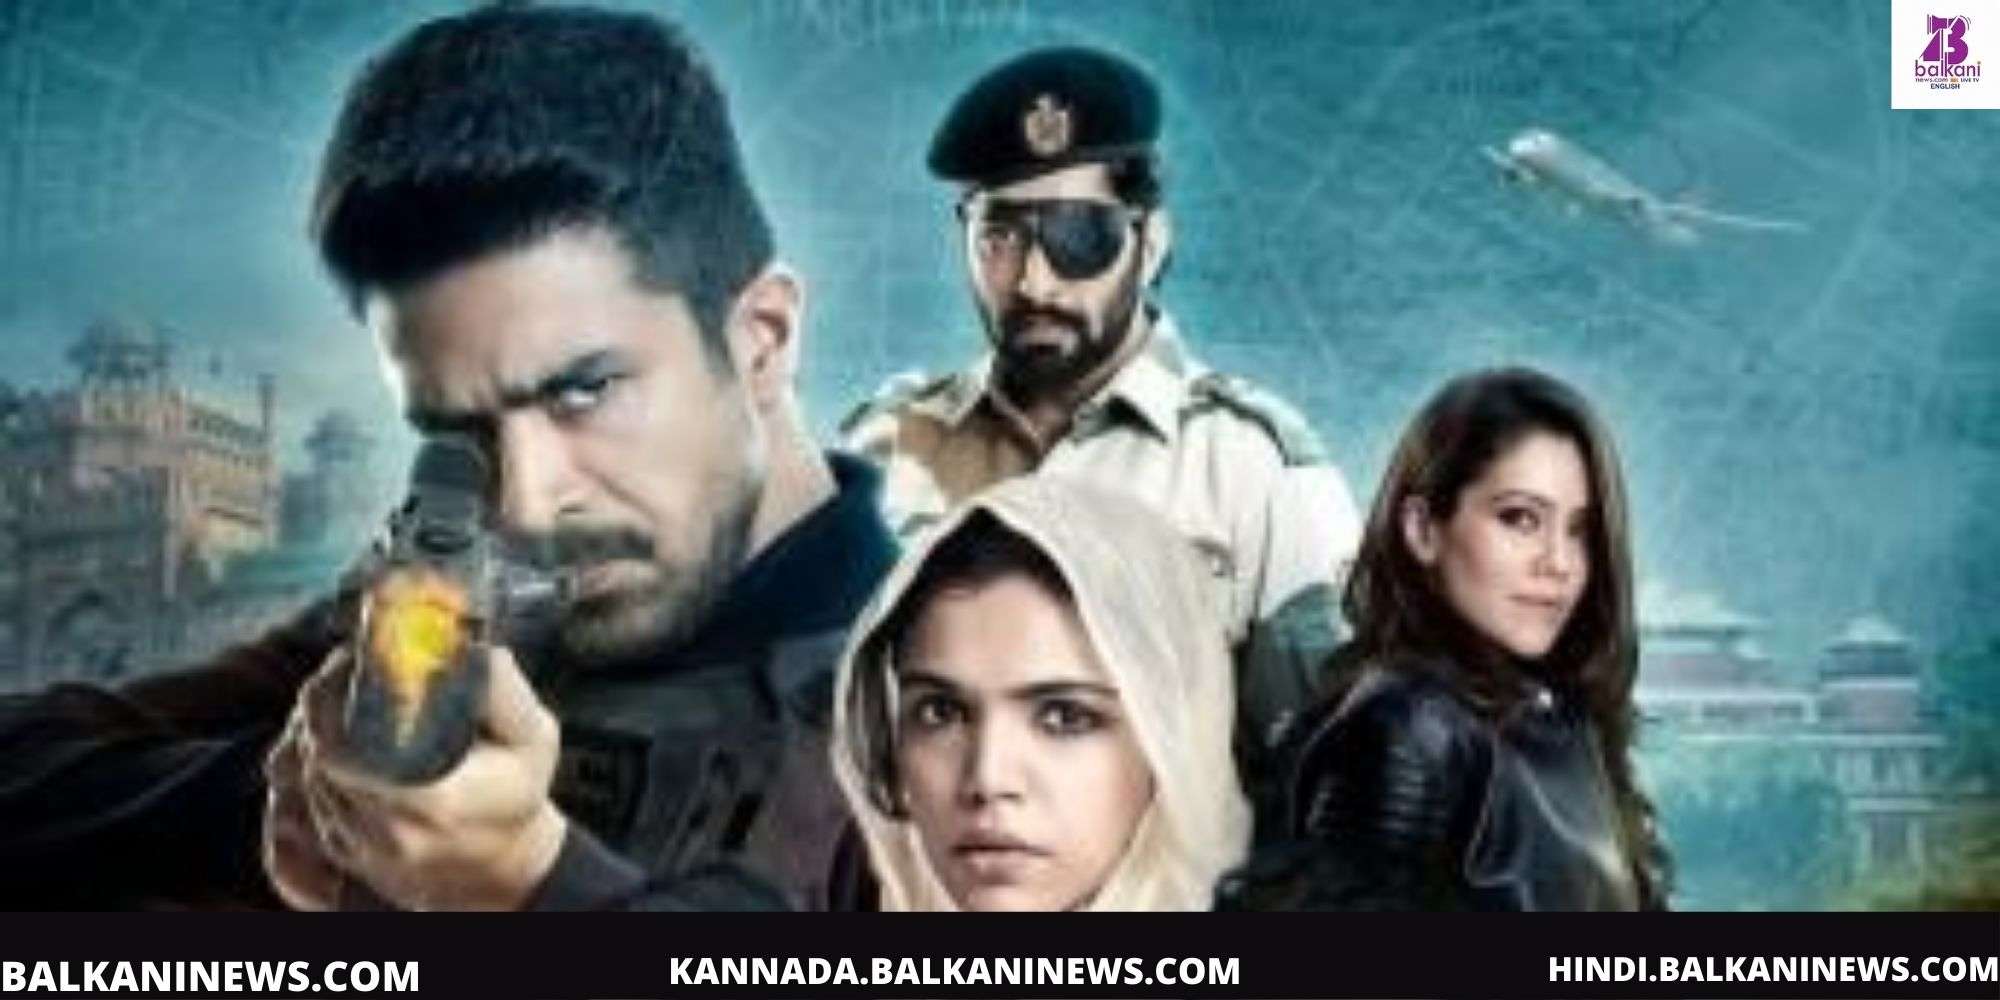 "Rajesh Tailang's next series 'Crackdown' to stream on Voot Select from this date".